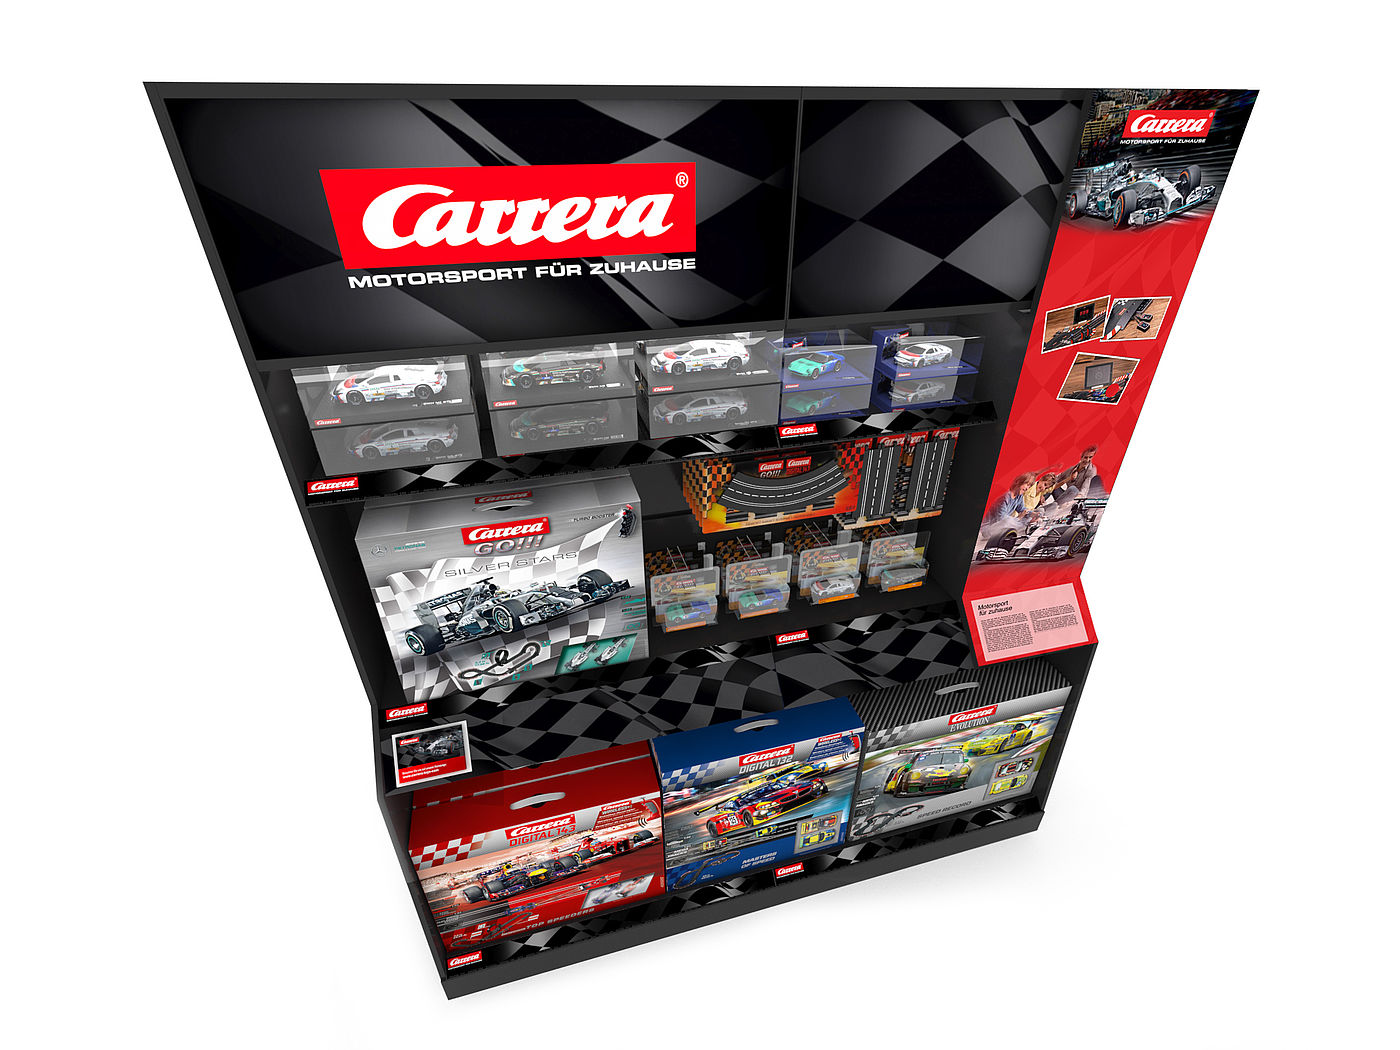 [Translate to Englisch:] Carrera Shop-in-Shop